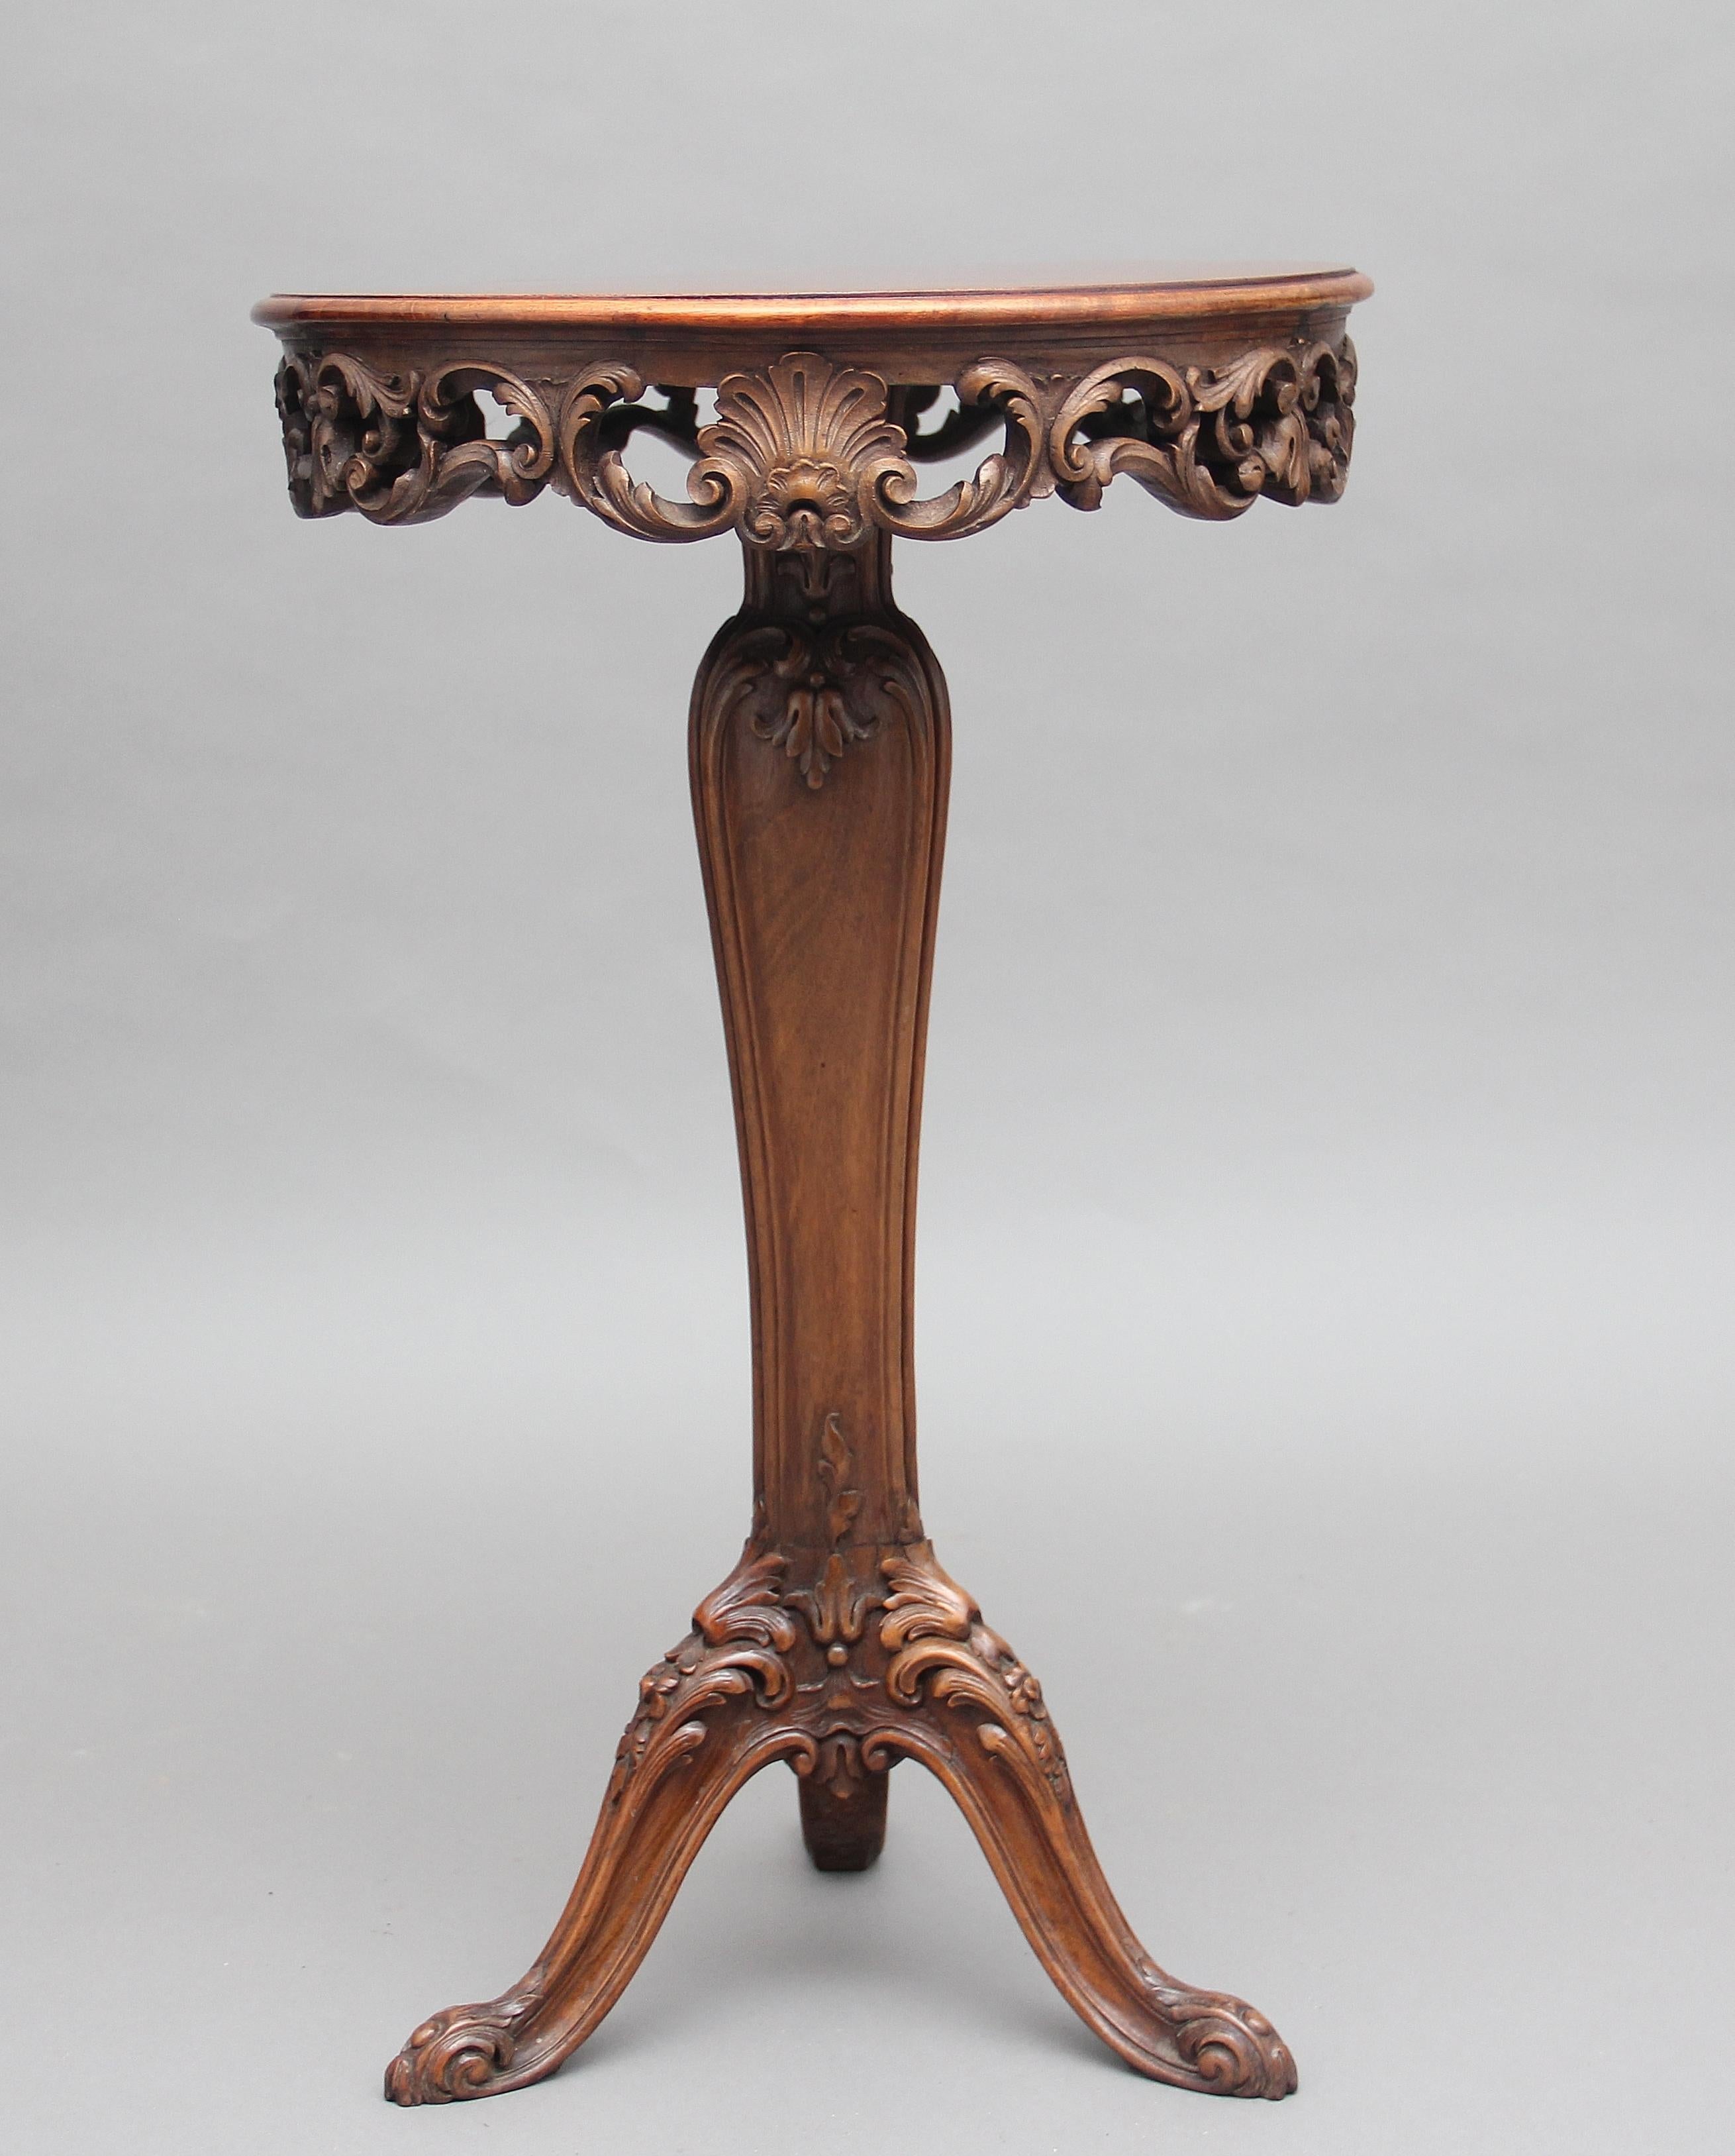 19th century French carved walnut occasional table, the circular top having a very ornate carved floral frieze including carved shell decoration, the top supported on a carved triform column terminating with three shaped and carved legs, circa